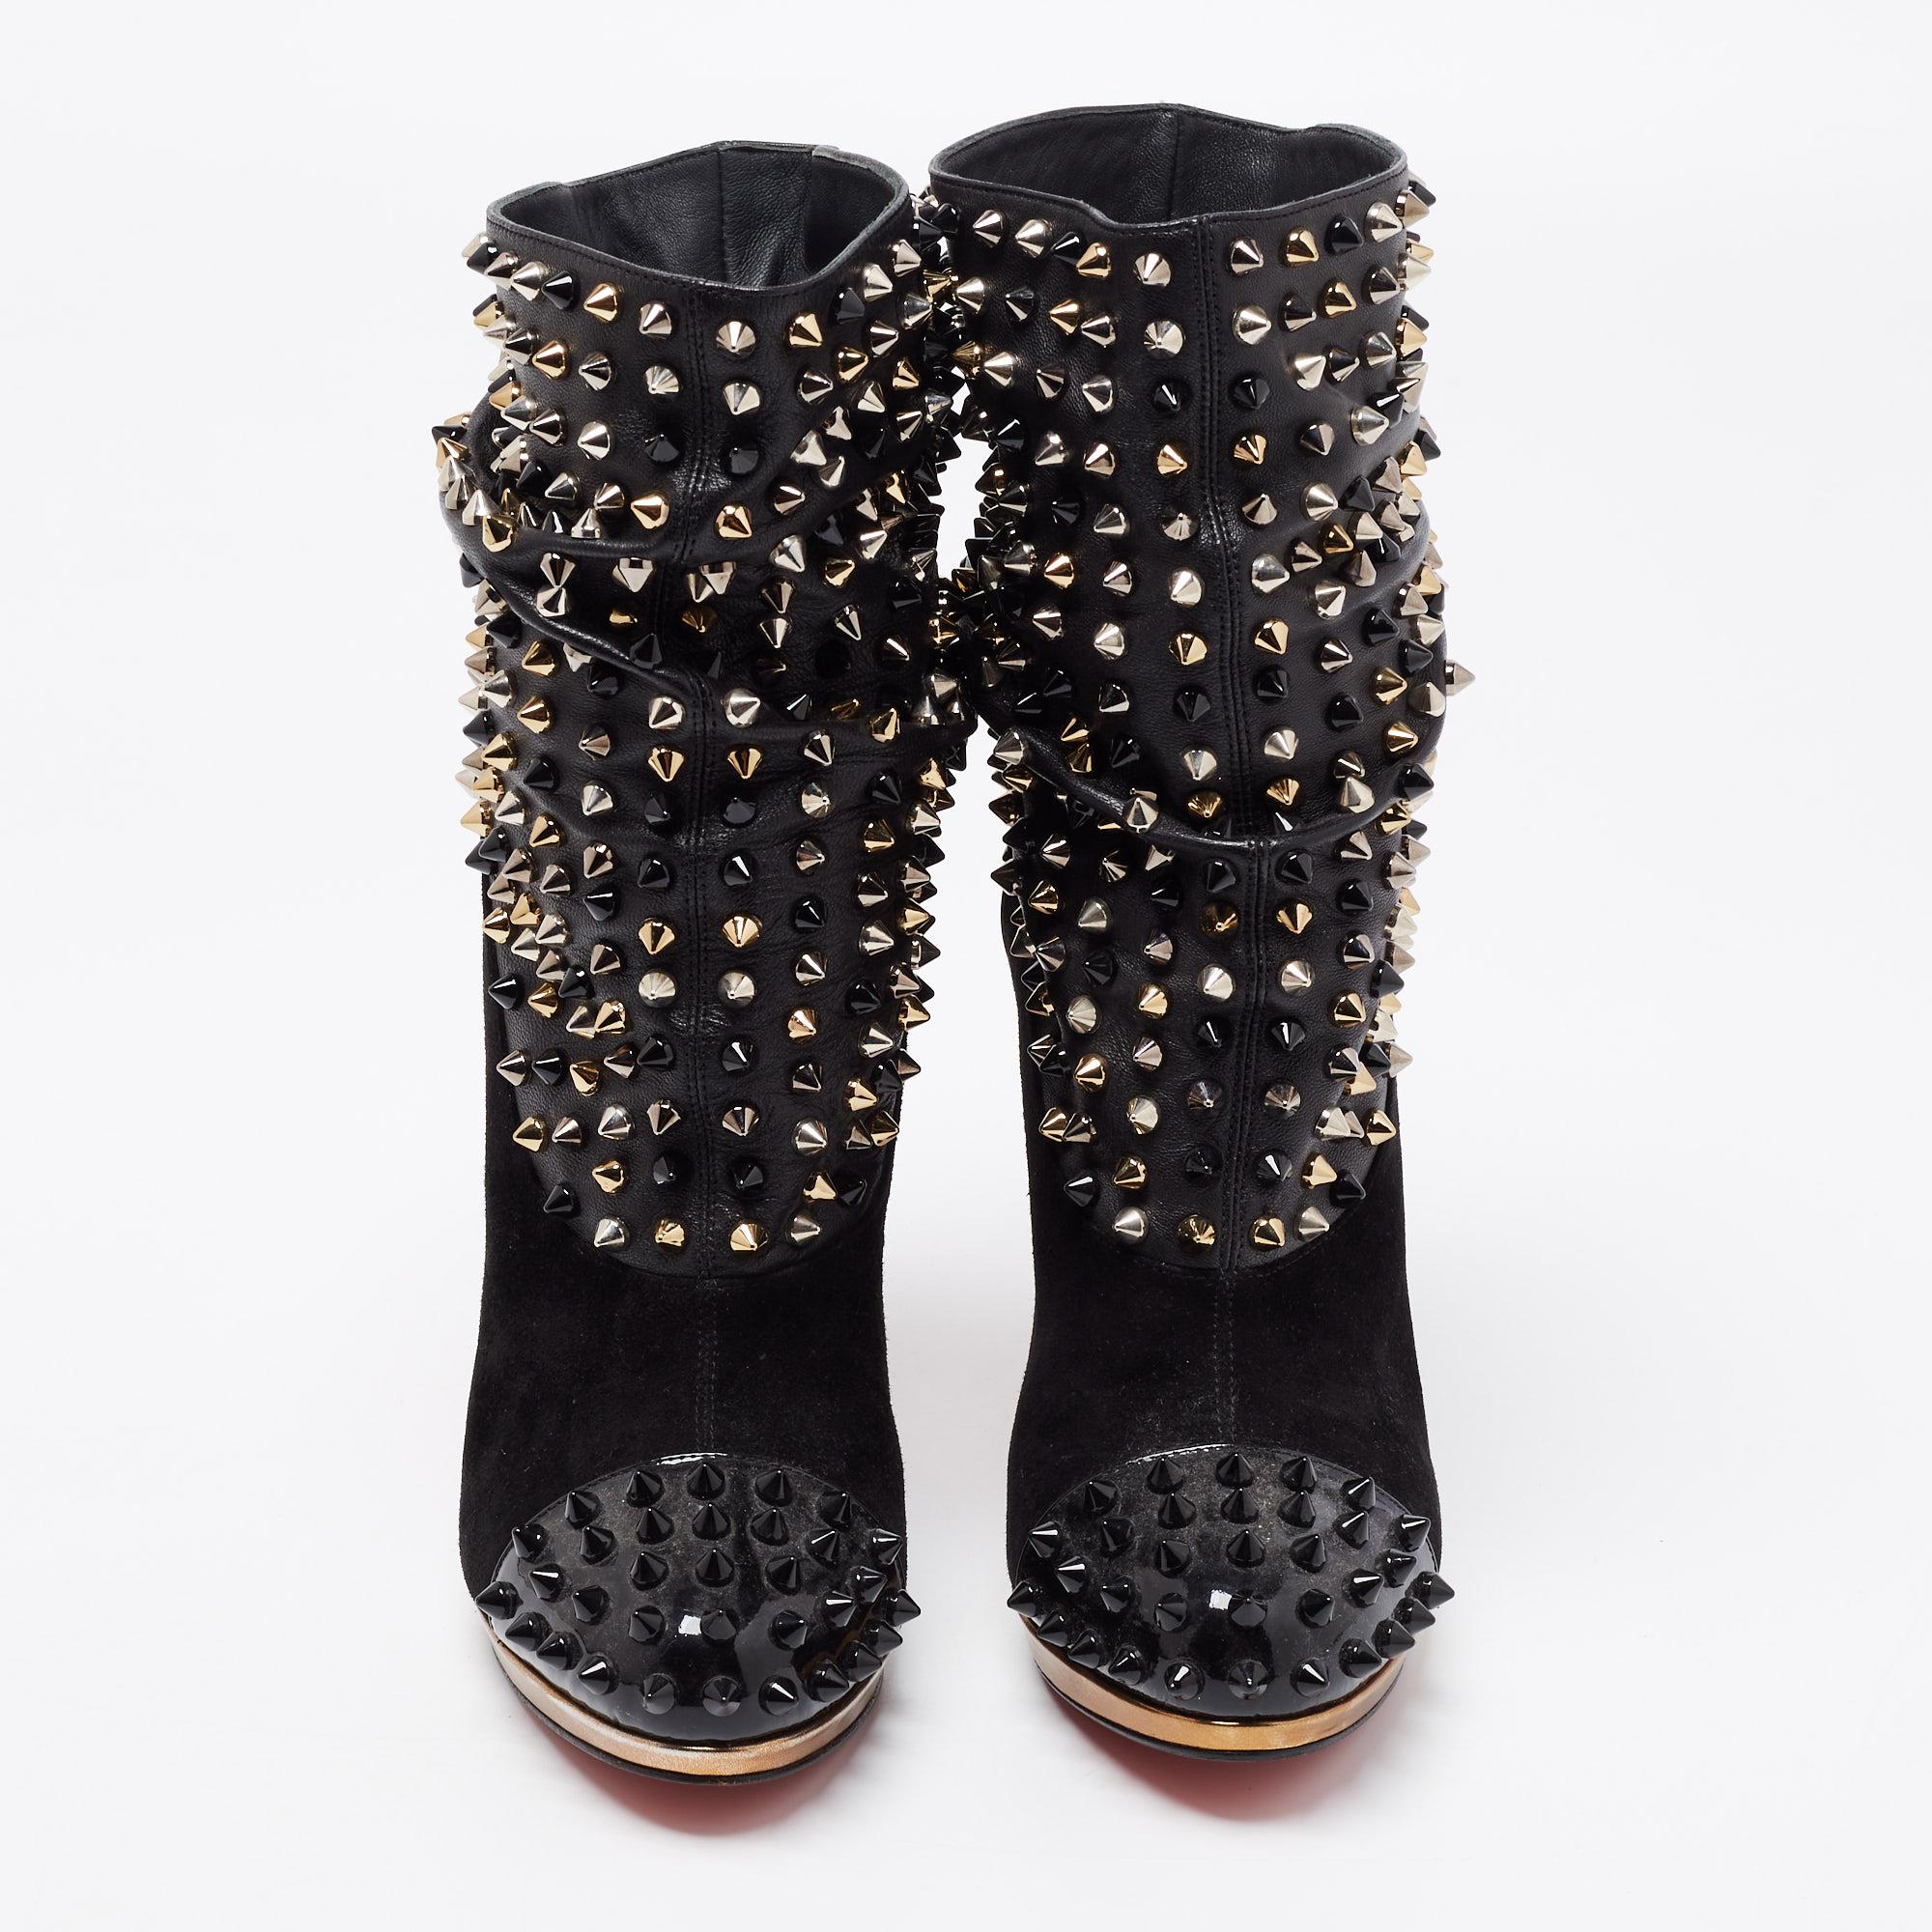 These Christian Louboutin booties will add an extra edge to your outfit. Created from leather, suede, and patent leather, the addition of spikes make them undeniably chic and the 10cm heels of this pair will lend you bold steps. The signature